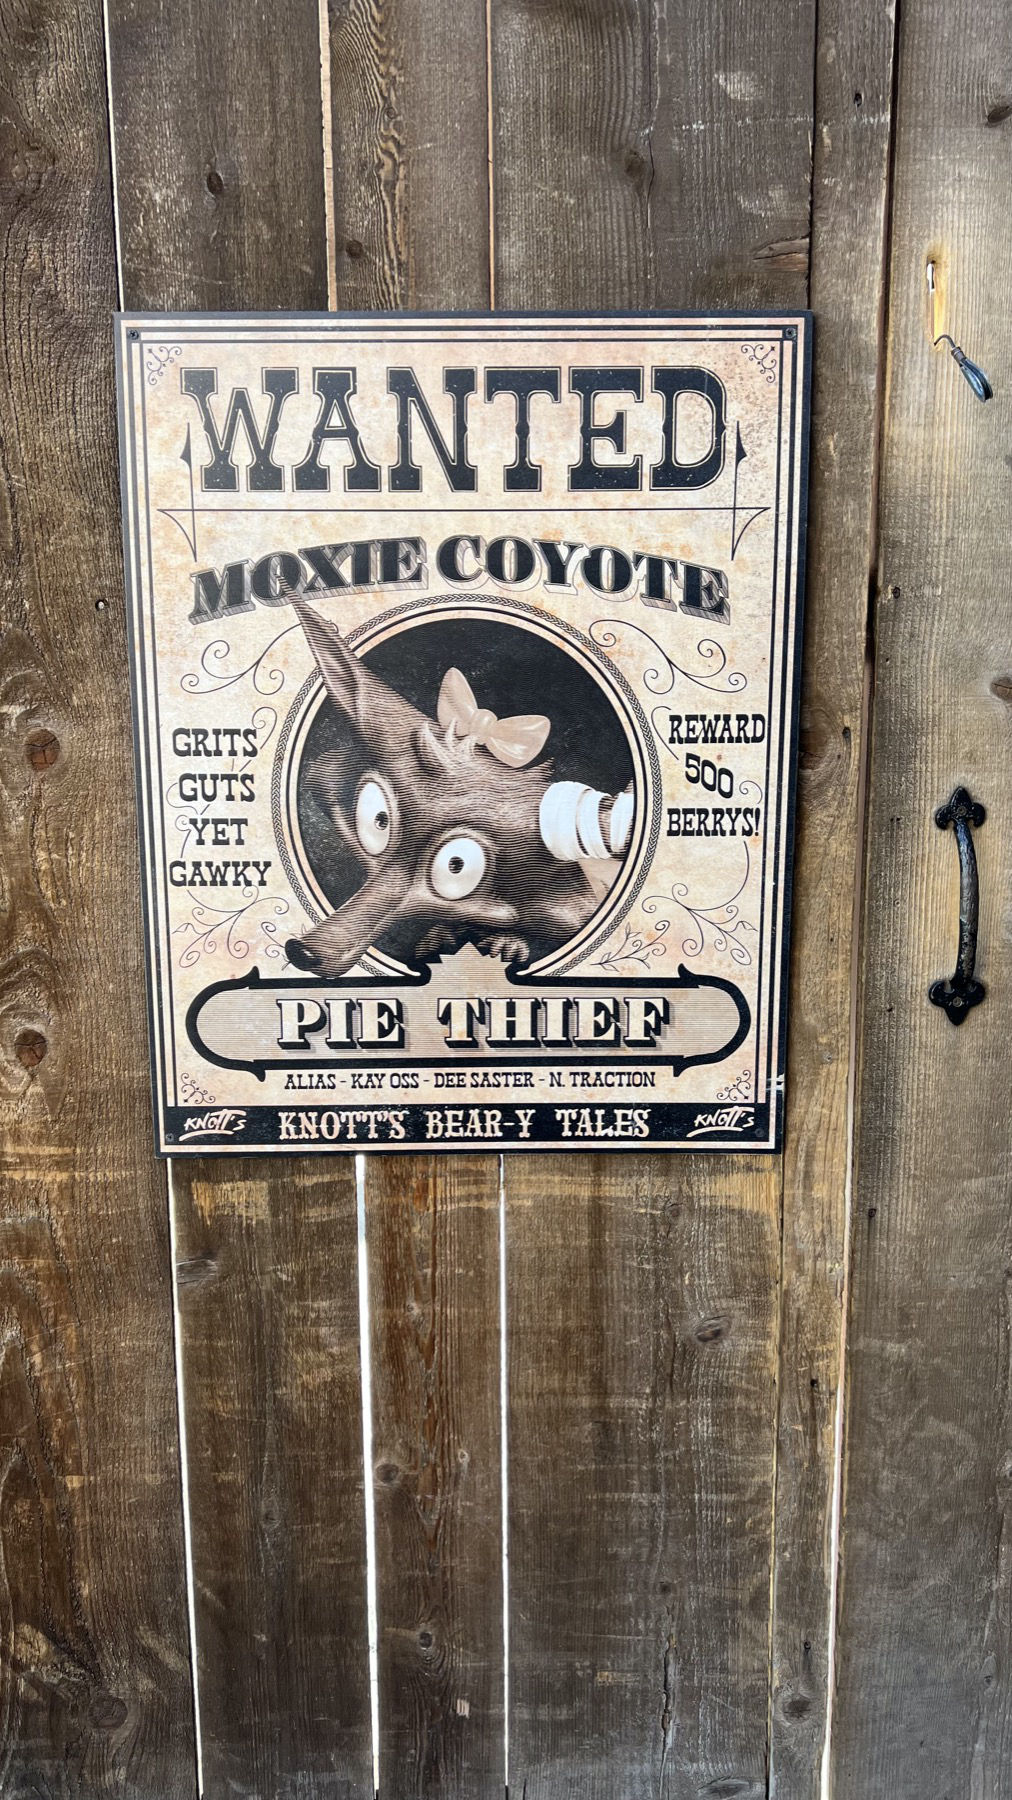 Wanted Moxie Coyote